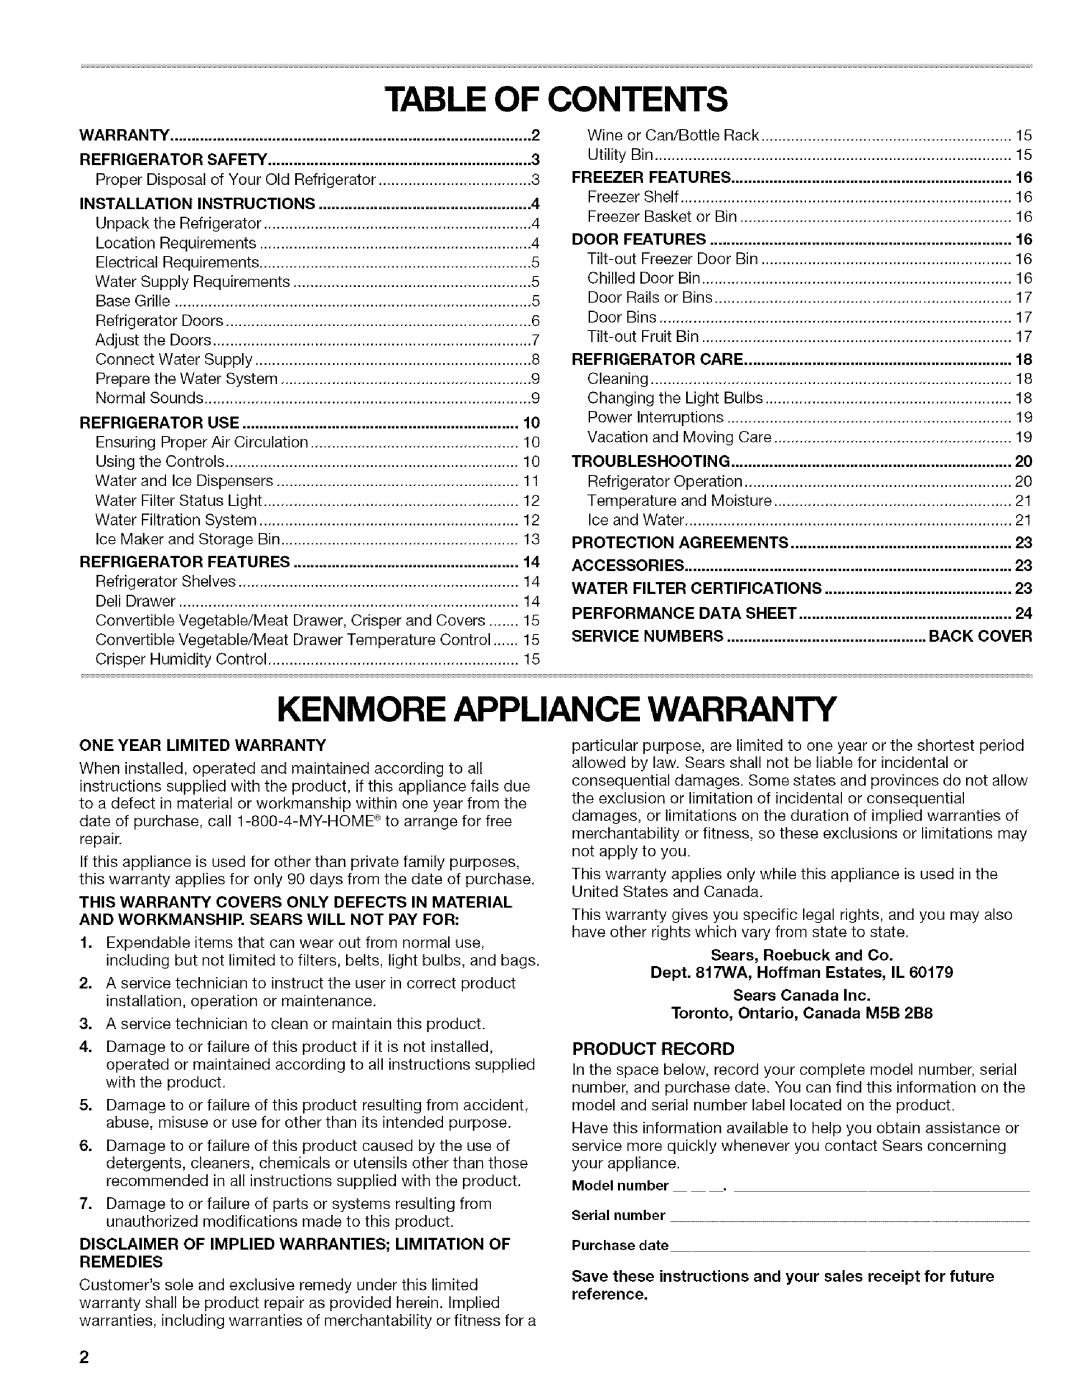 Kenmore 10656832603 manual Table Of Contents, Kenmore Appliance Warranty, Refrigerator, Freezer, Features, Model number 